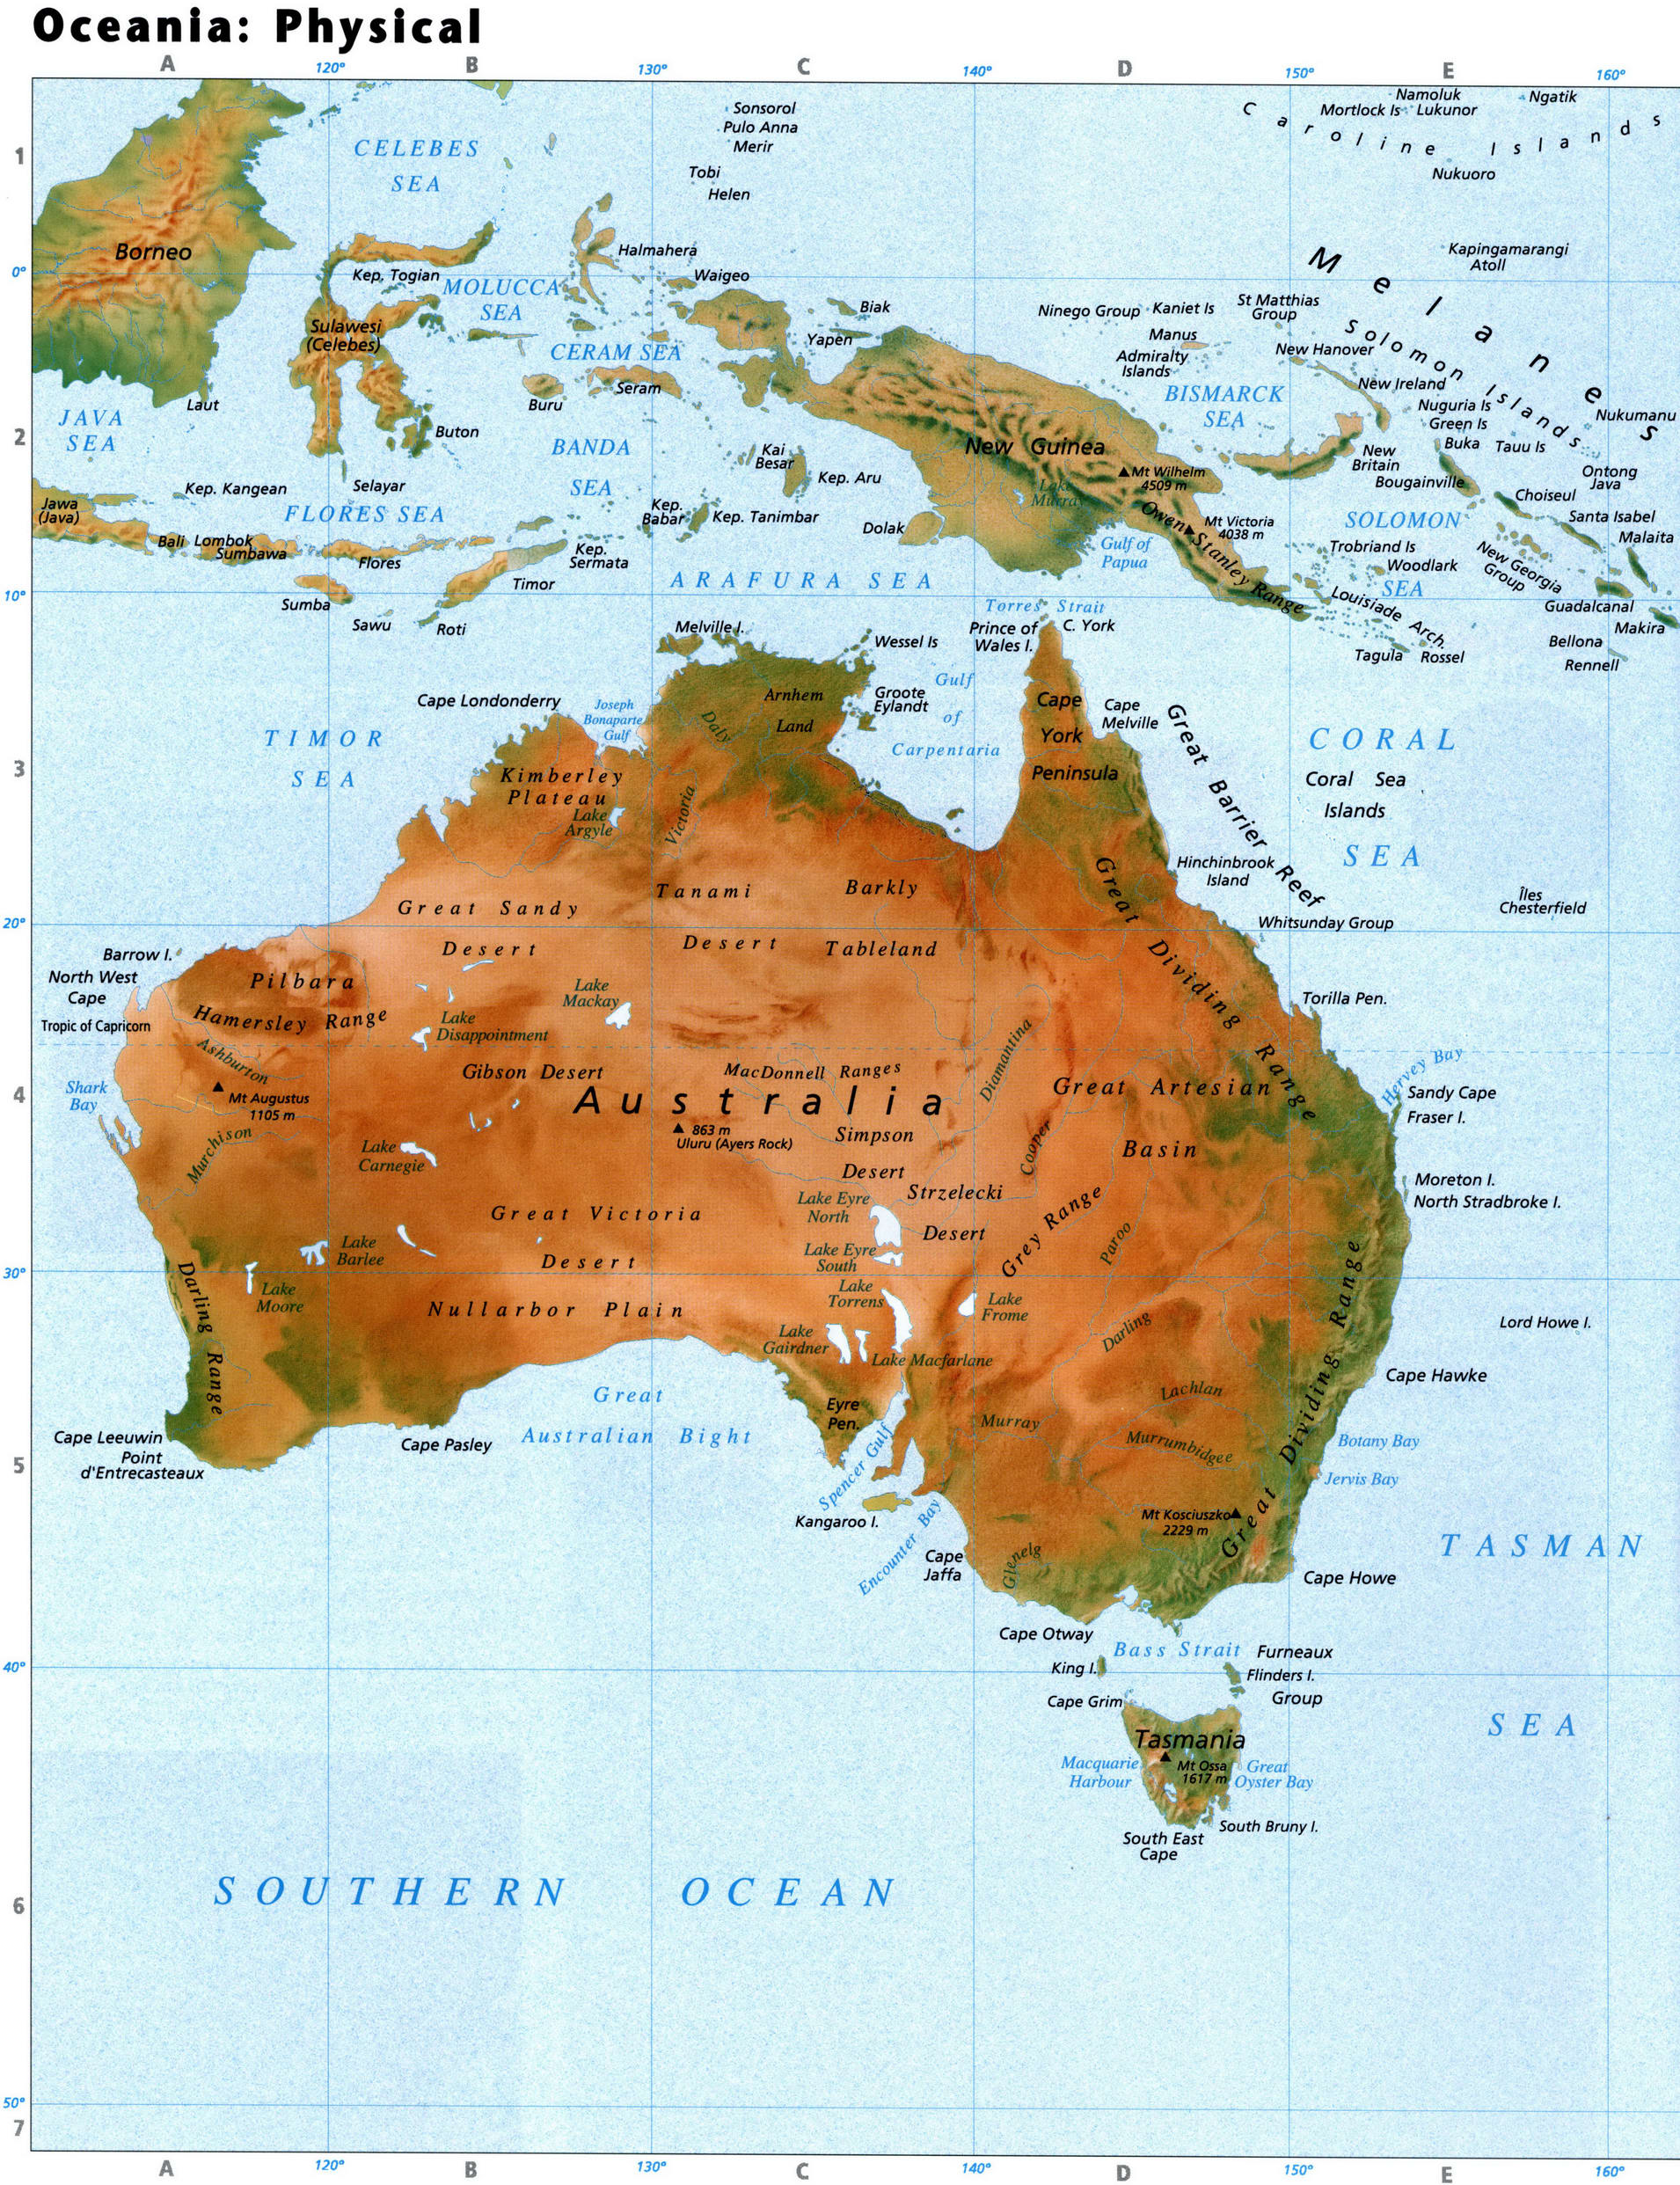 Australia and Oceania physical map